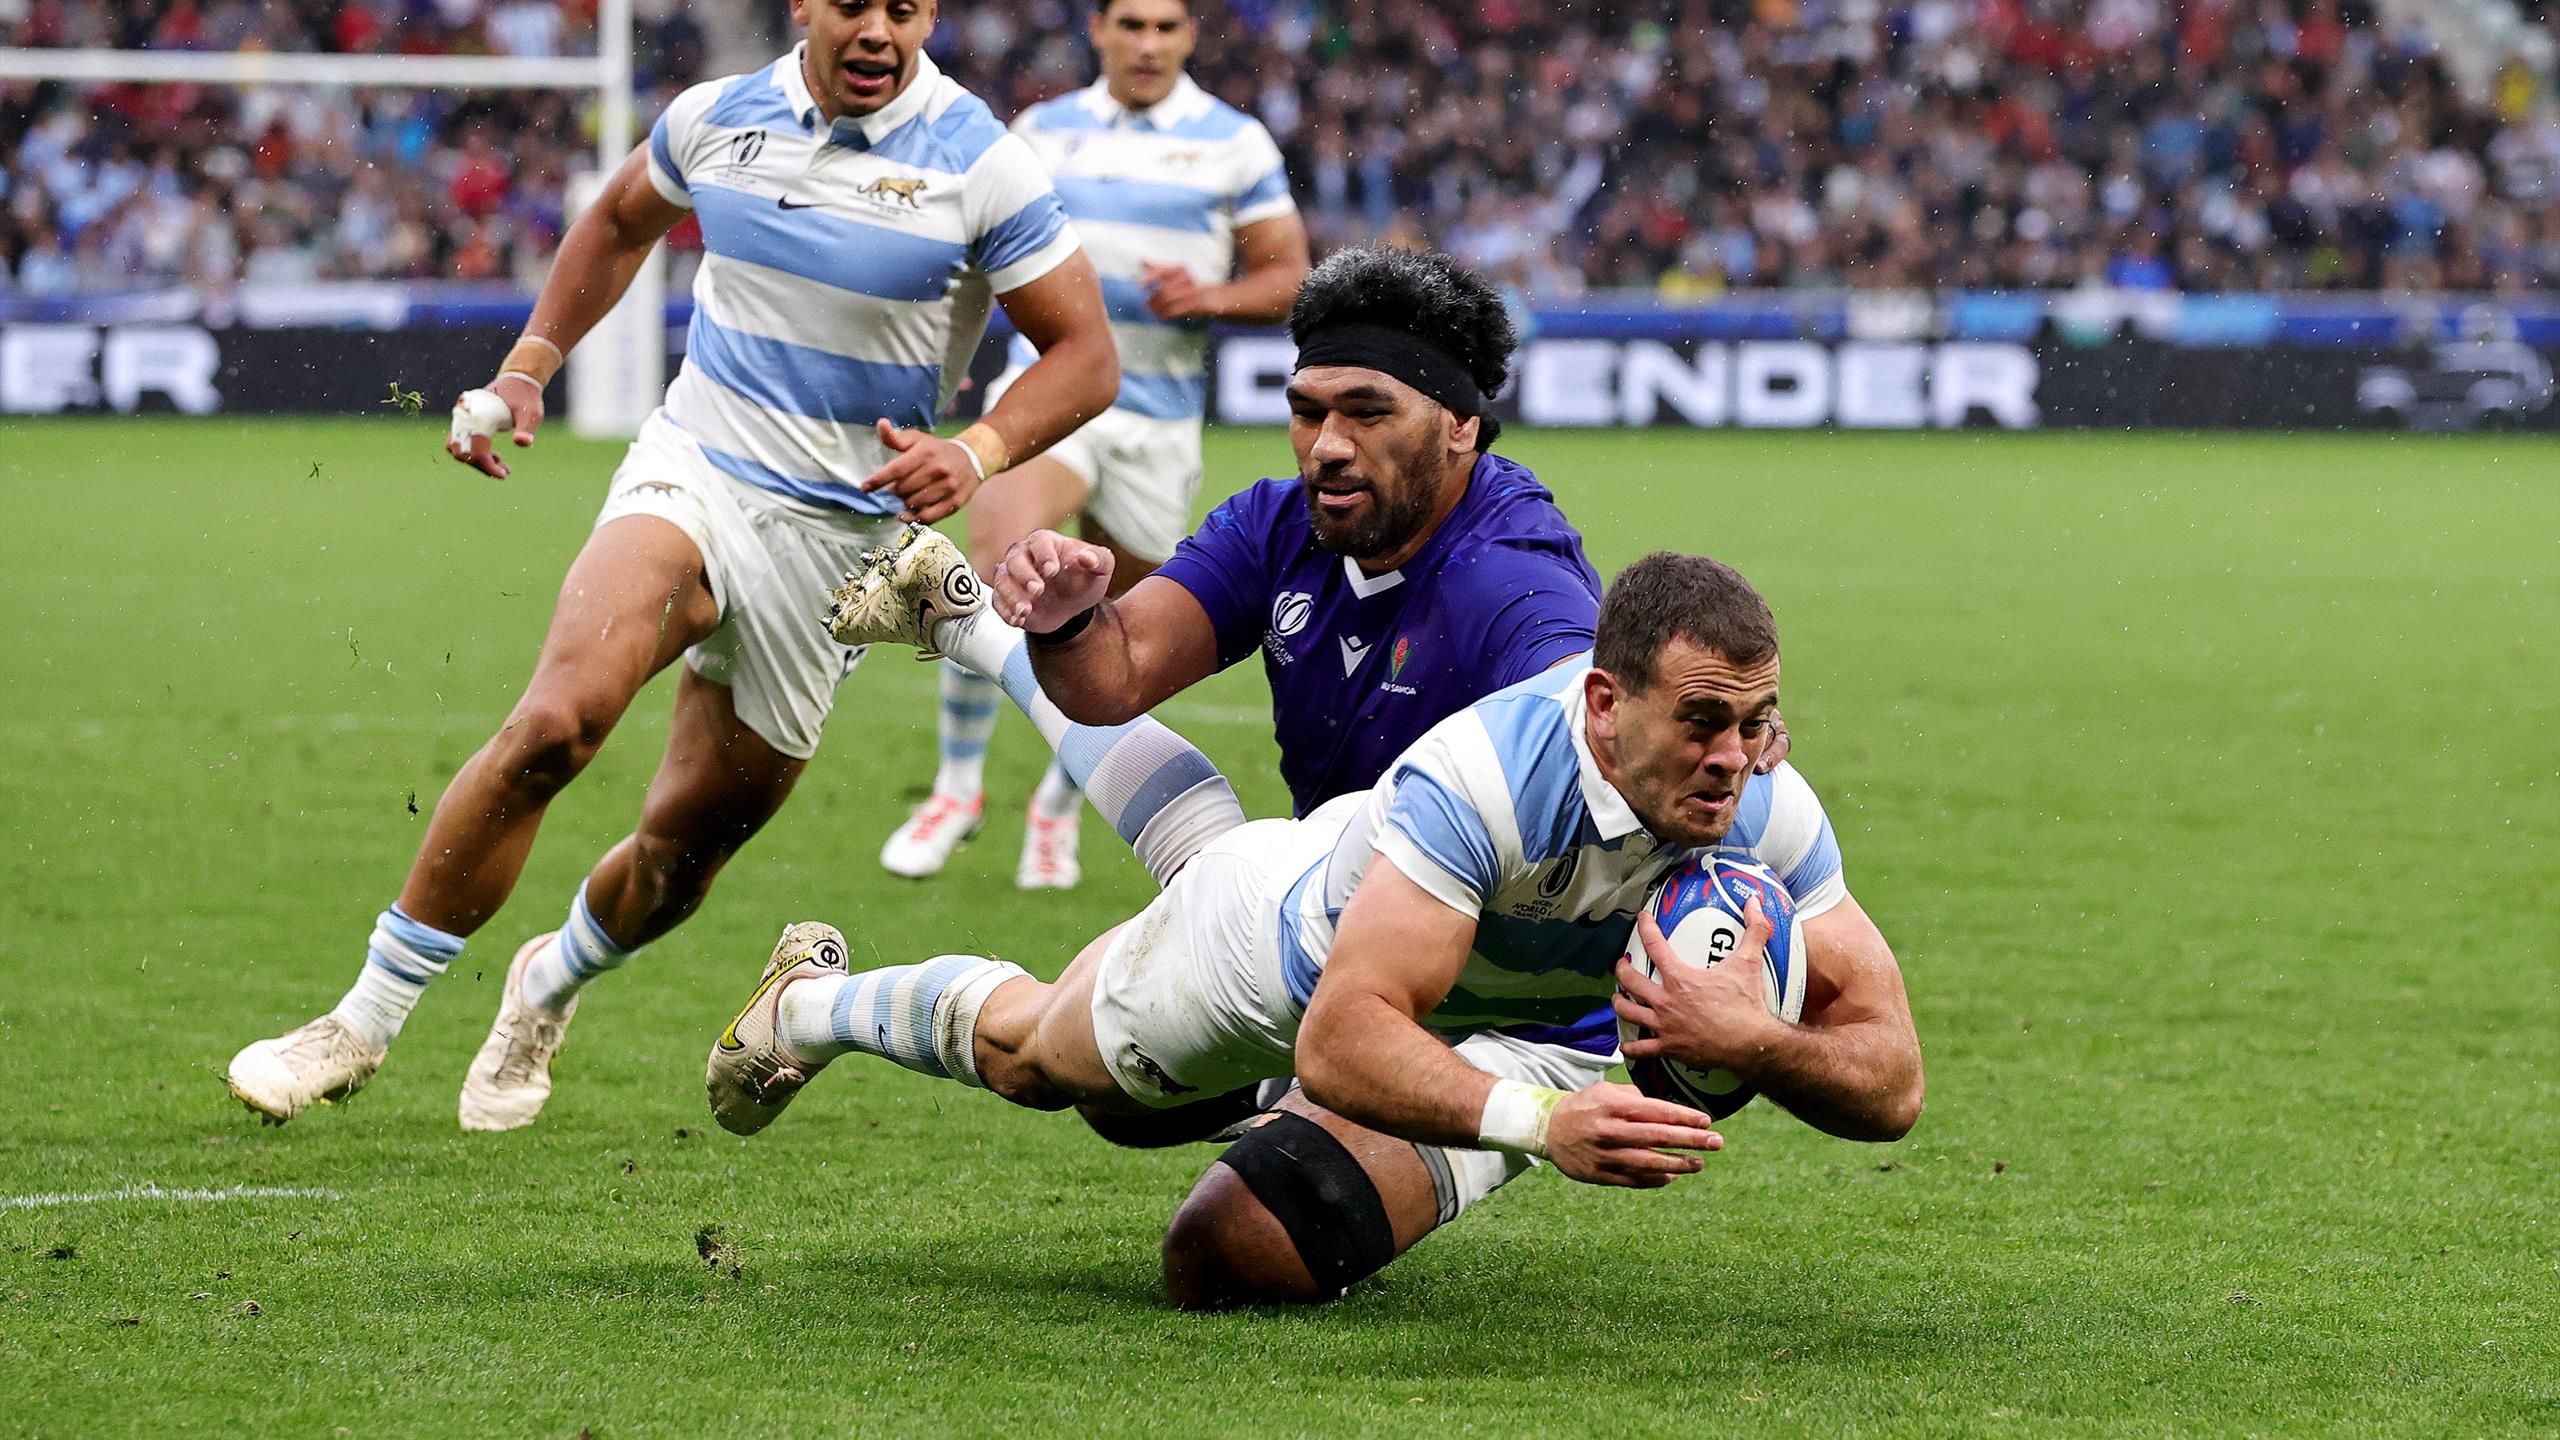 Argentina 19-10 Samoa The Pumas keep Rugby World Cup dream alive with edgy win in saturated Saint-Étienne